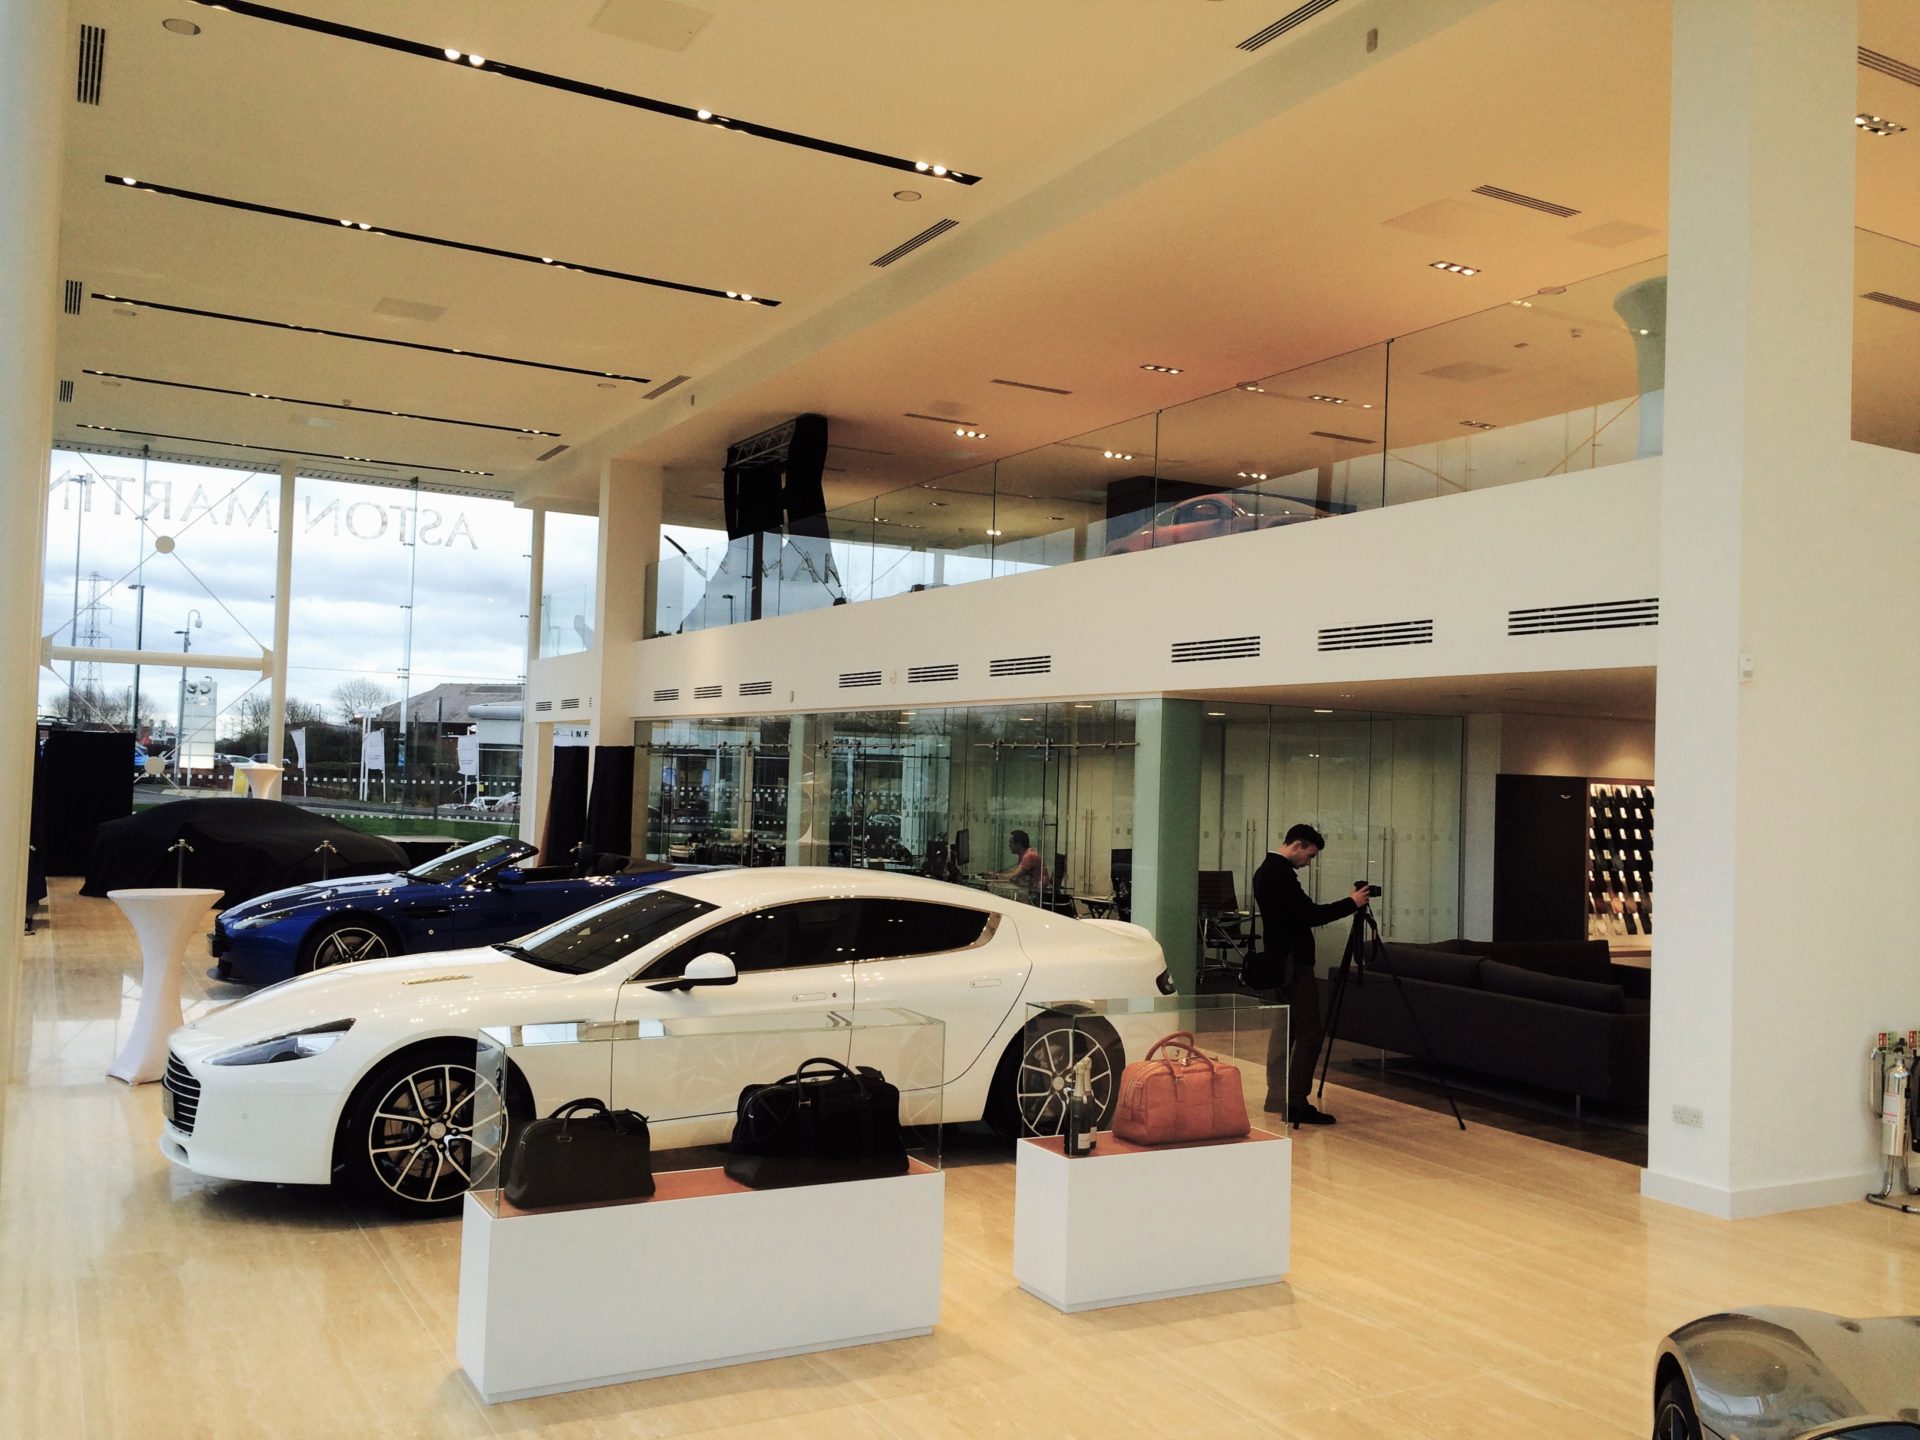 Aston martin showroom, glazed partitions by Office Blinds & Glazing